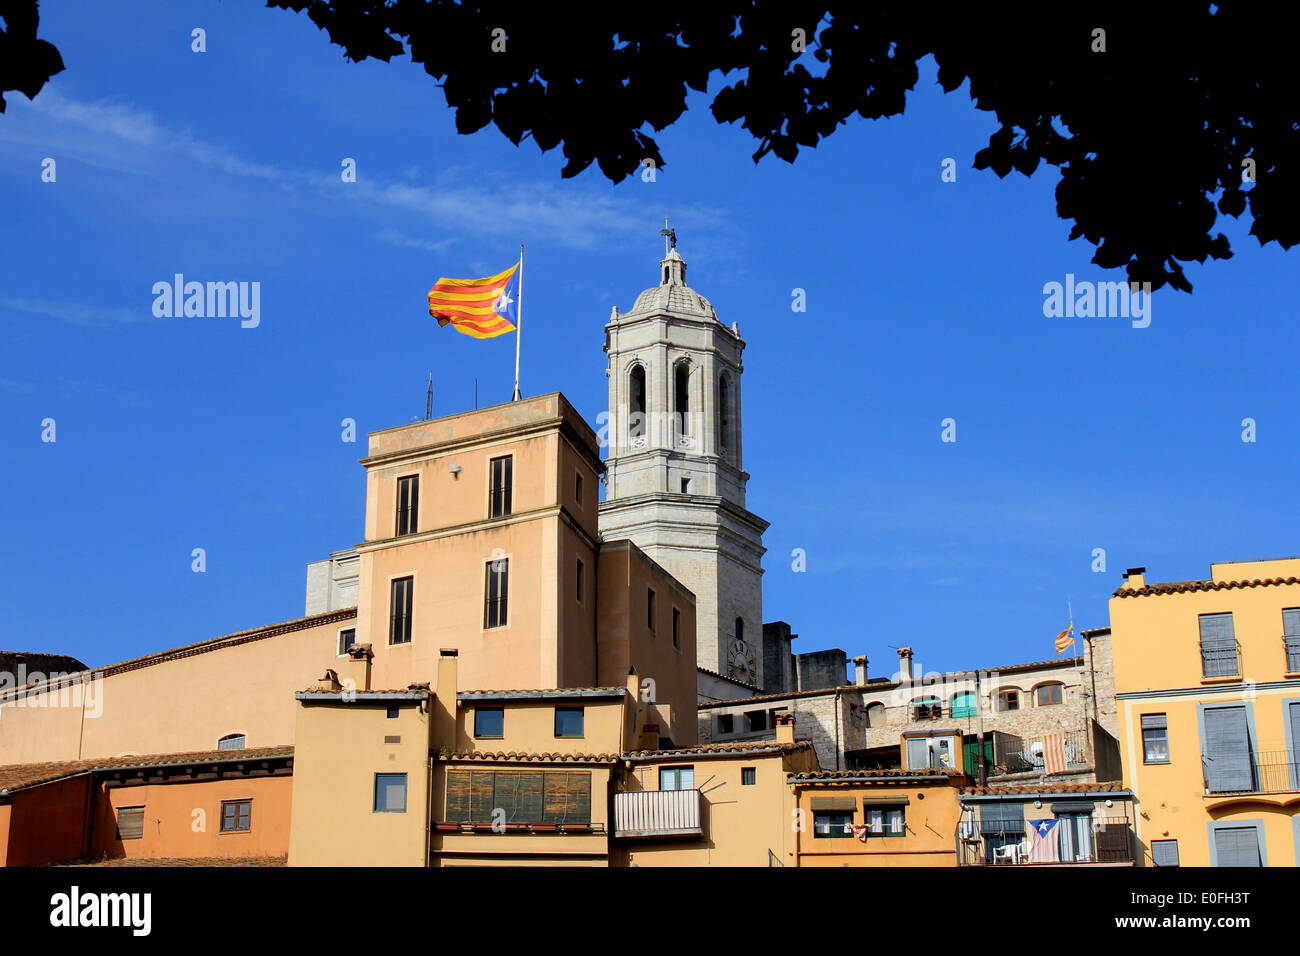 Girona Cathedral and the Catalan flag flying over the old part of the city, Girona, Catalonia, Spain Stock Photo